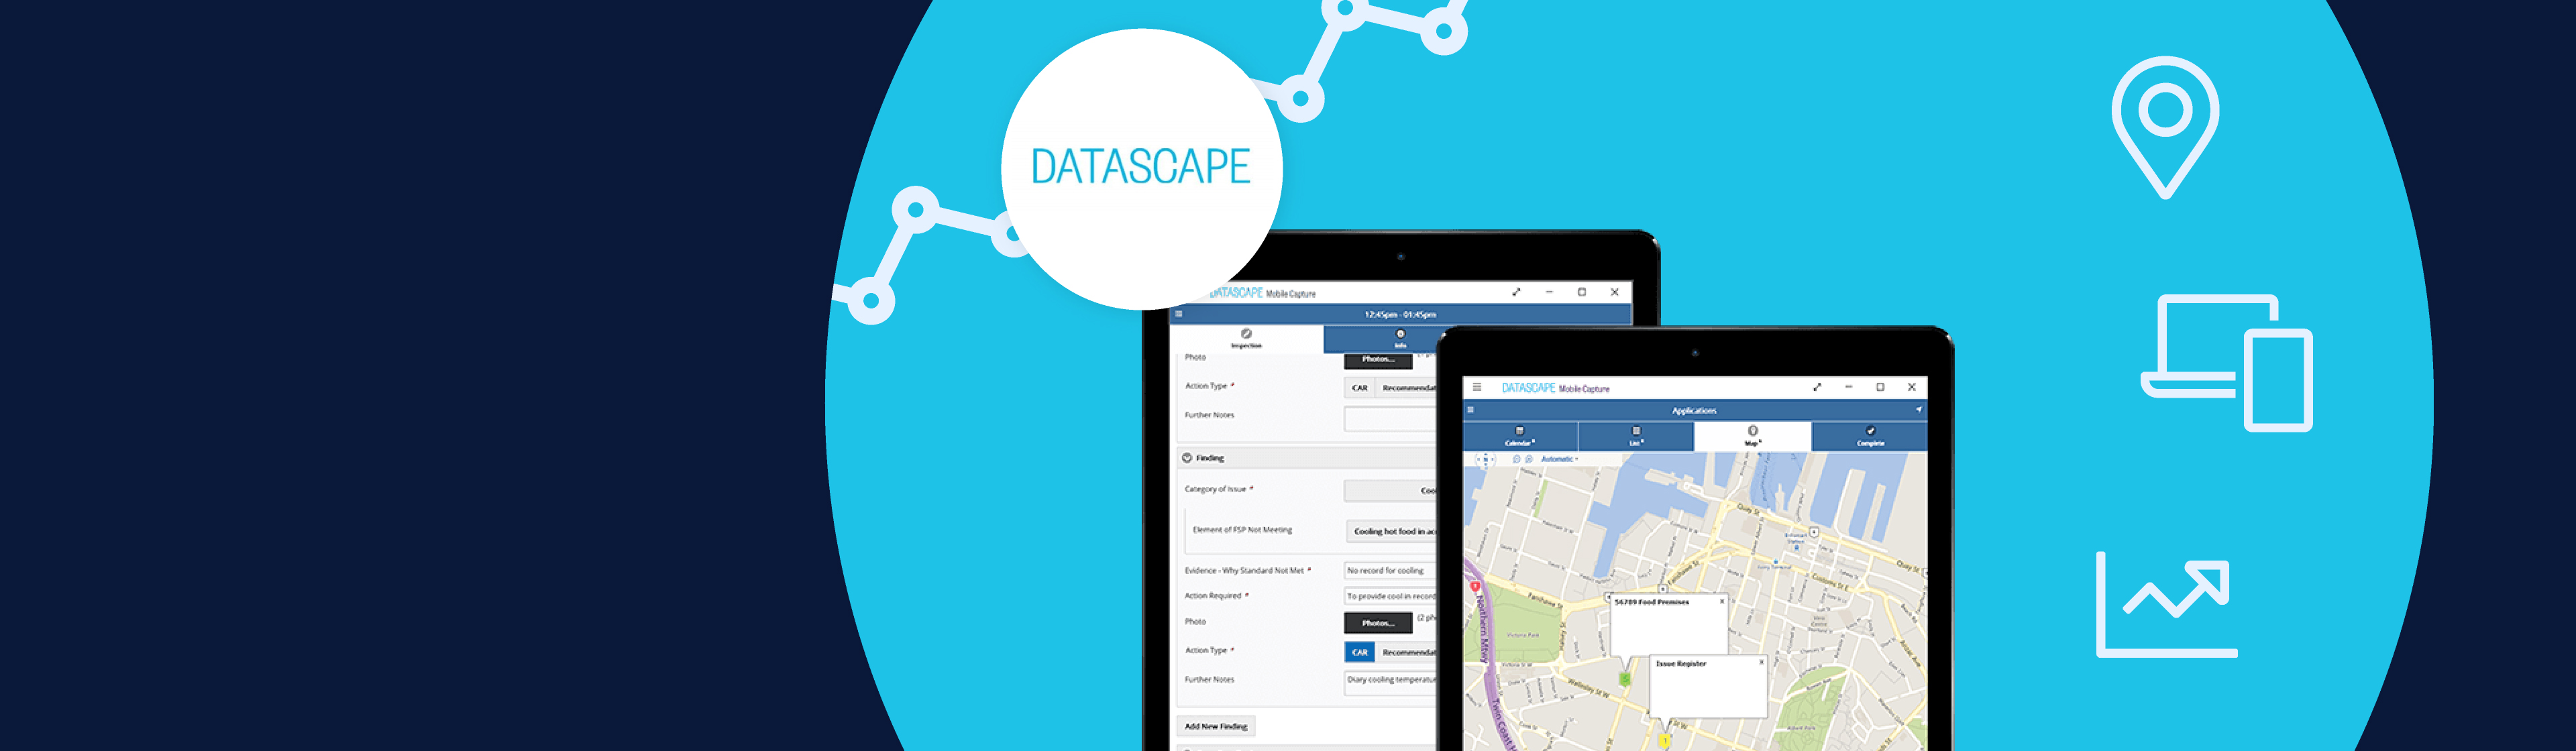 Screen mock up of the Datascape mobile capture application